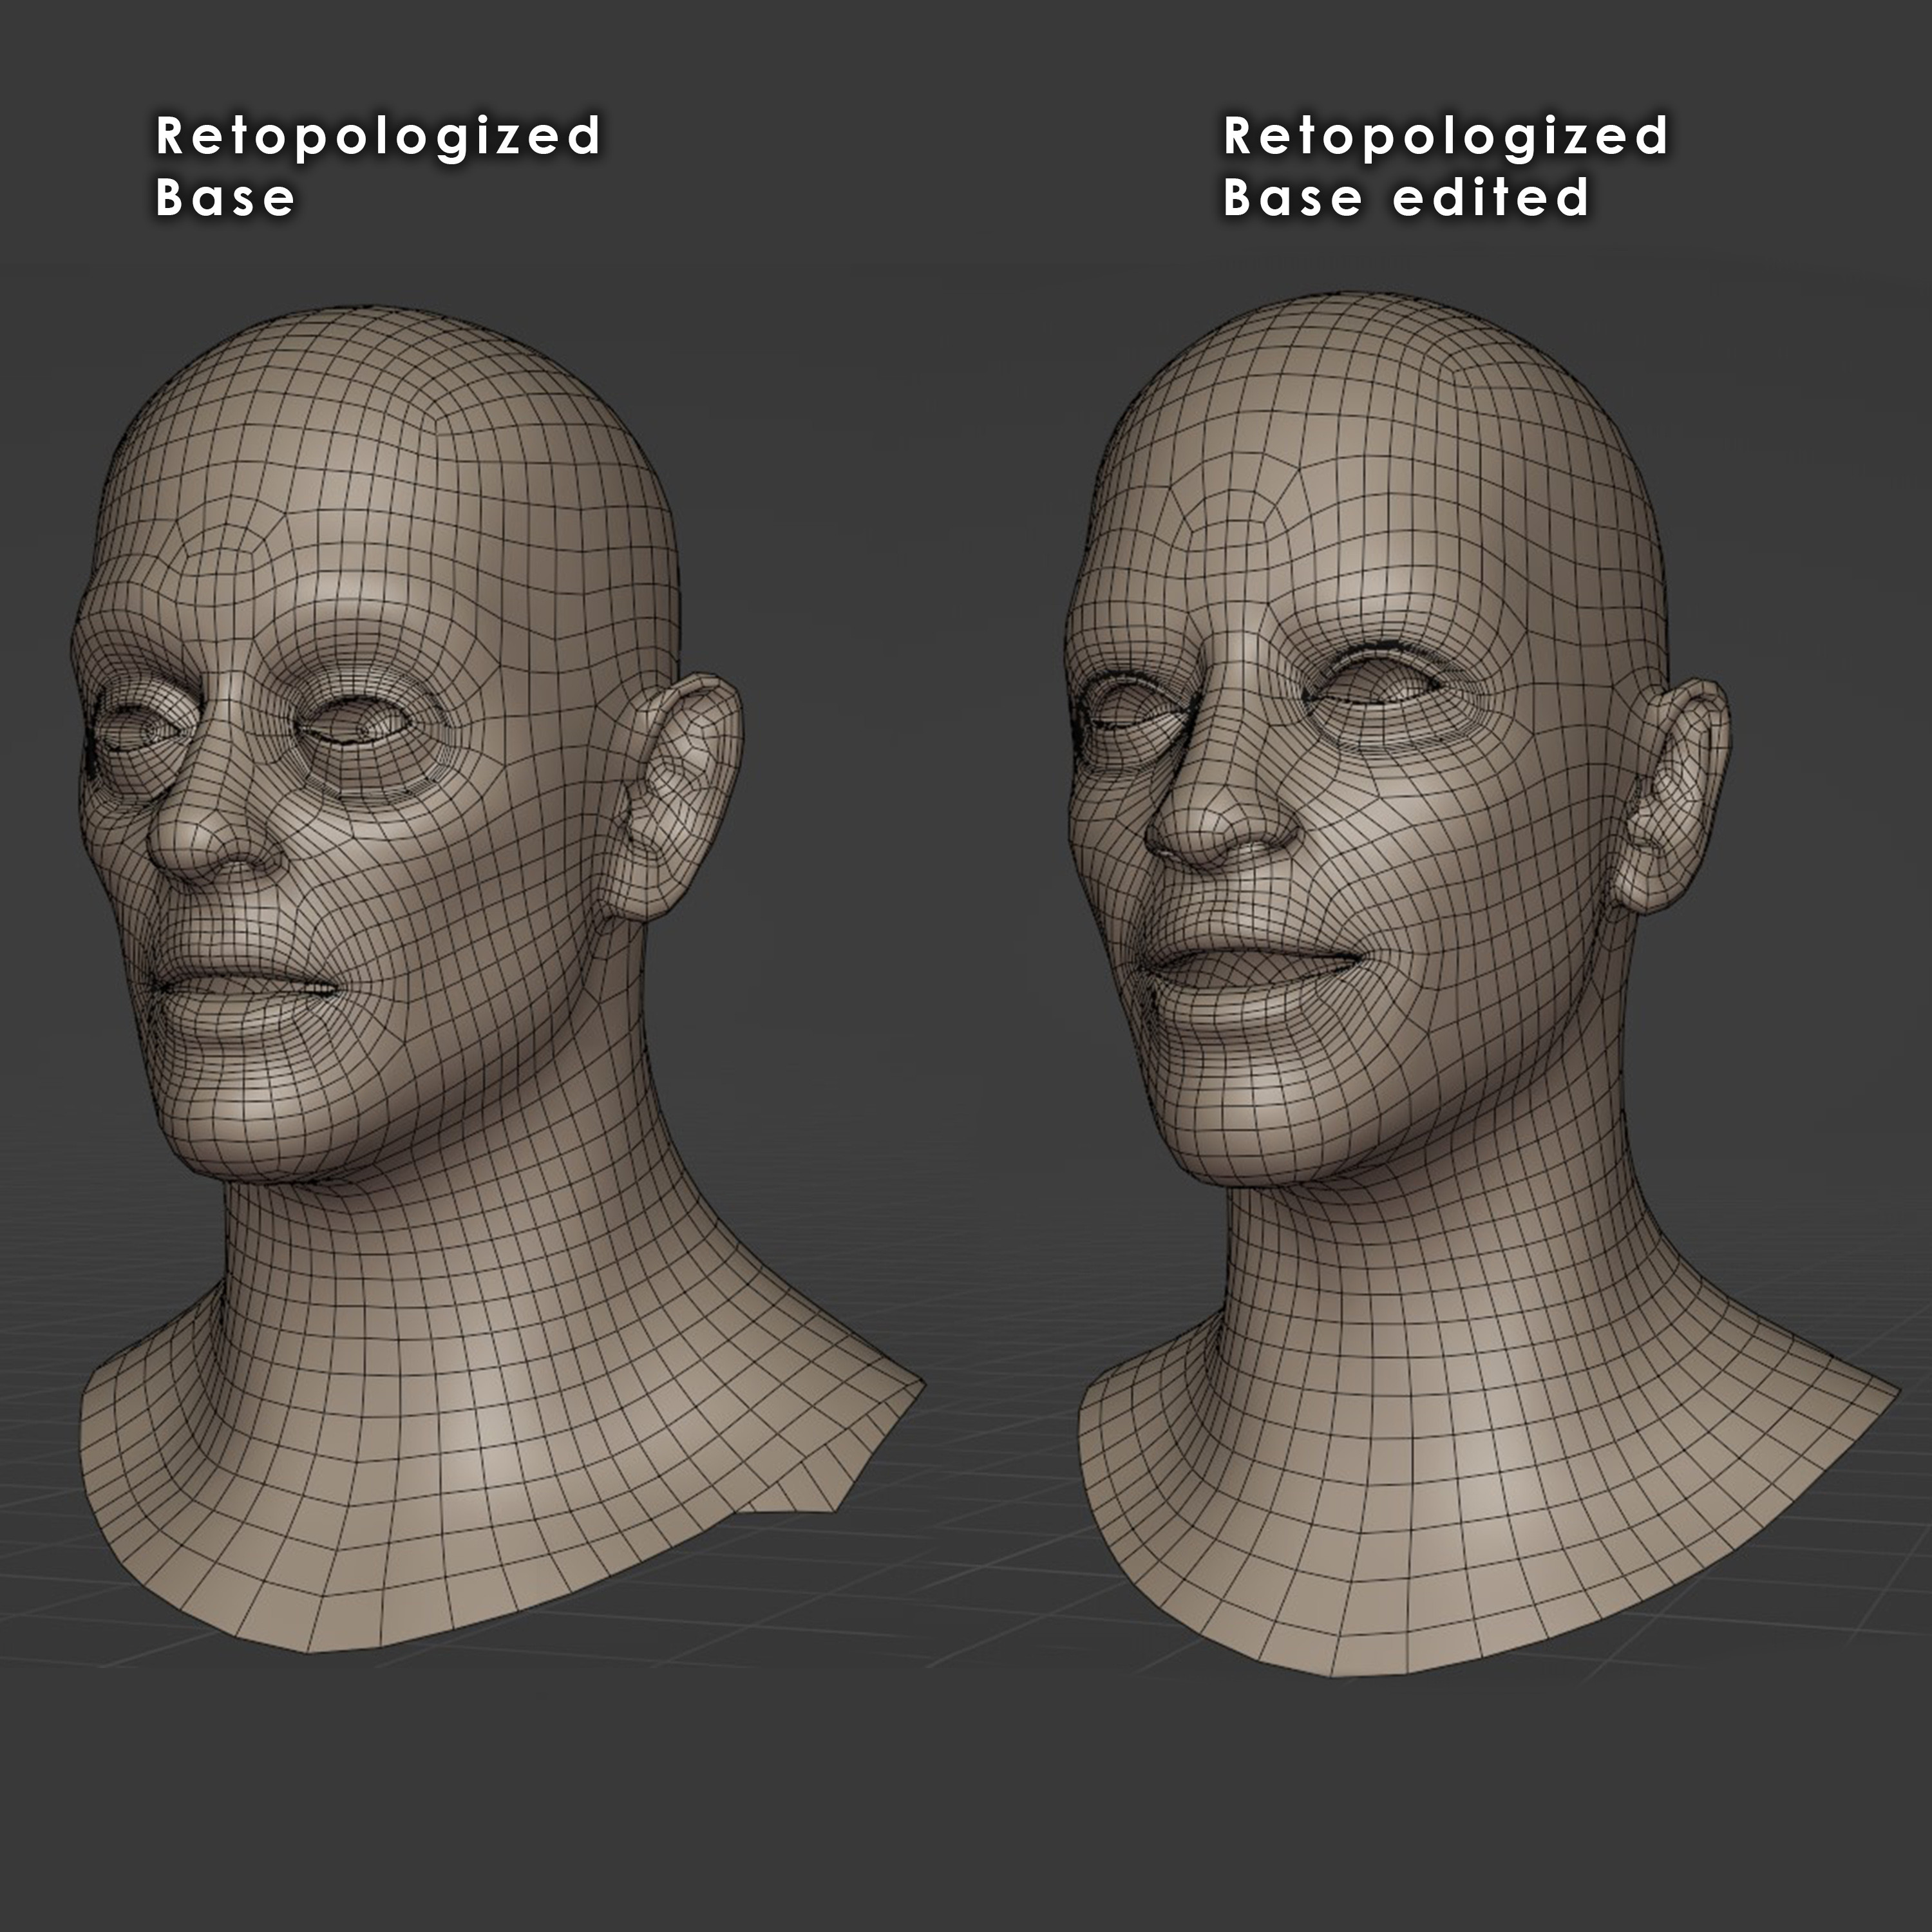 The retopology was done in Blender. I've learned that if I keep the eye bags(area) separated from the eye lids I can later then sculpt in the eye bags so they actually sit on top of the eyelids. 